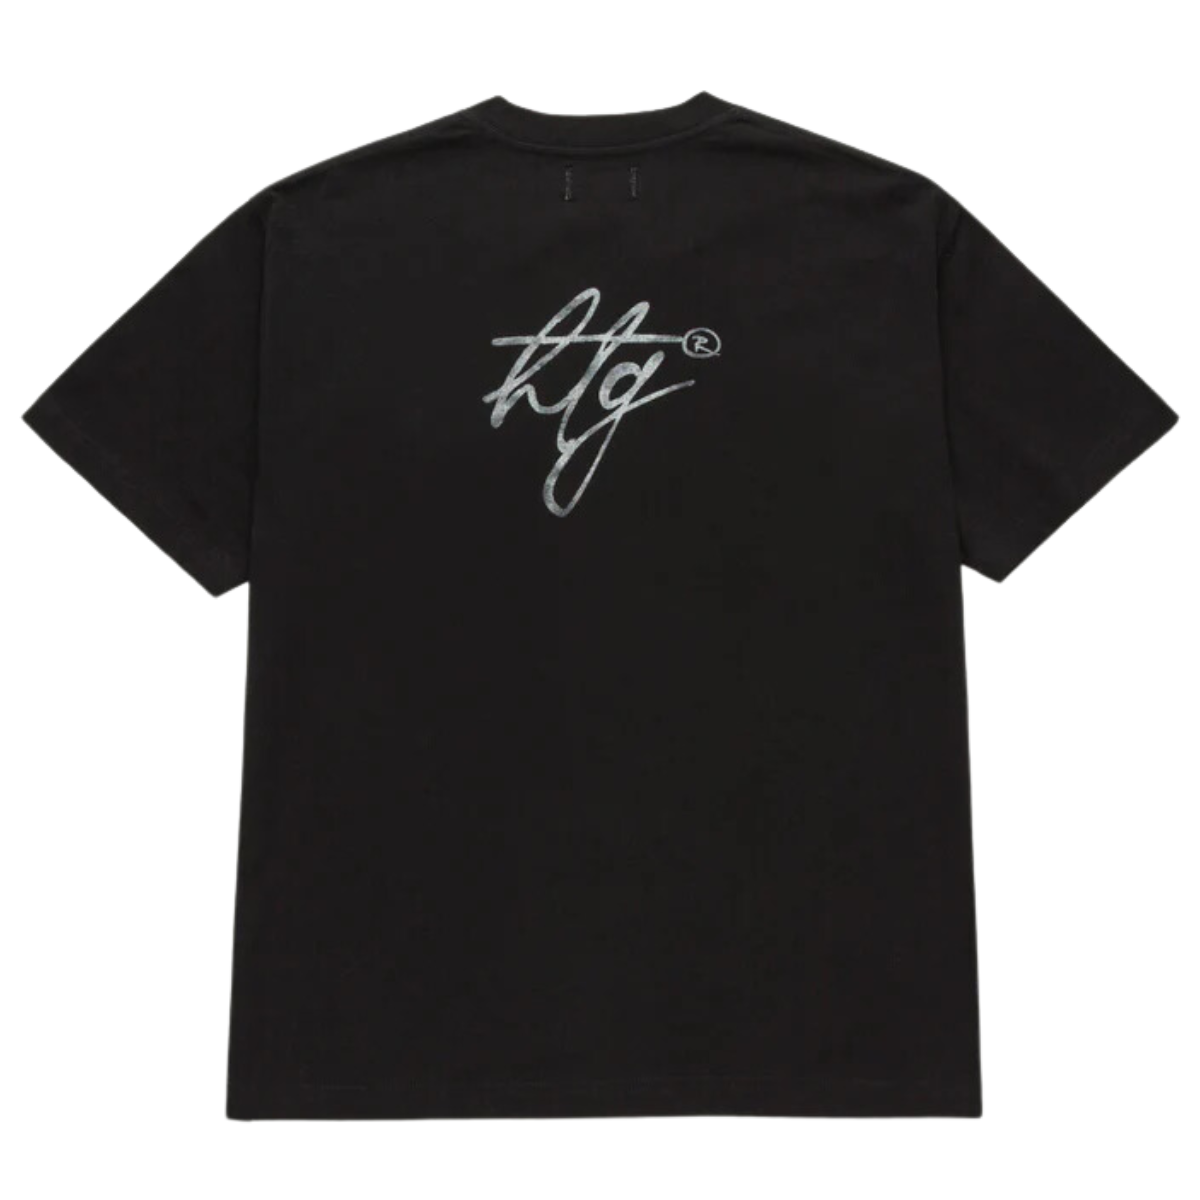 Honor The Gift Truth S/S Tee - Black